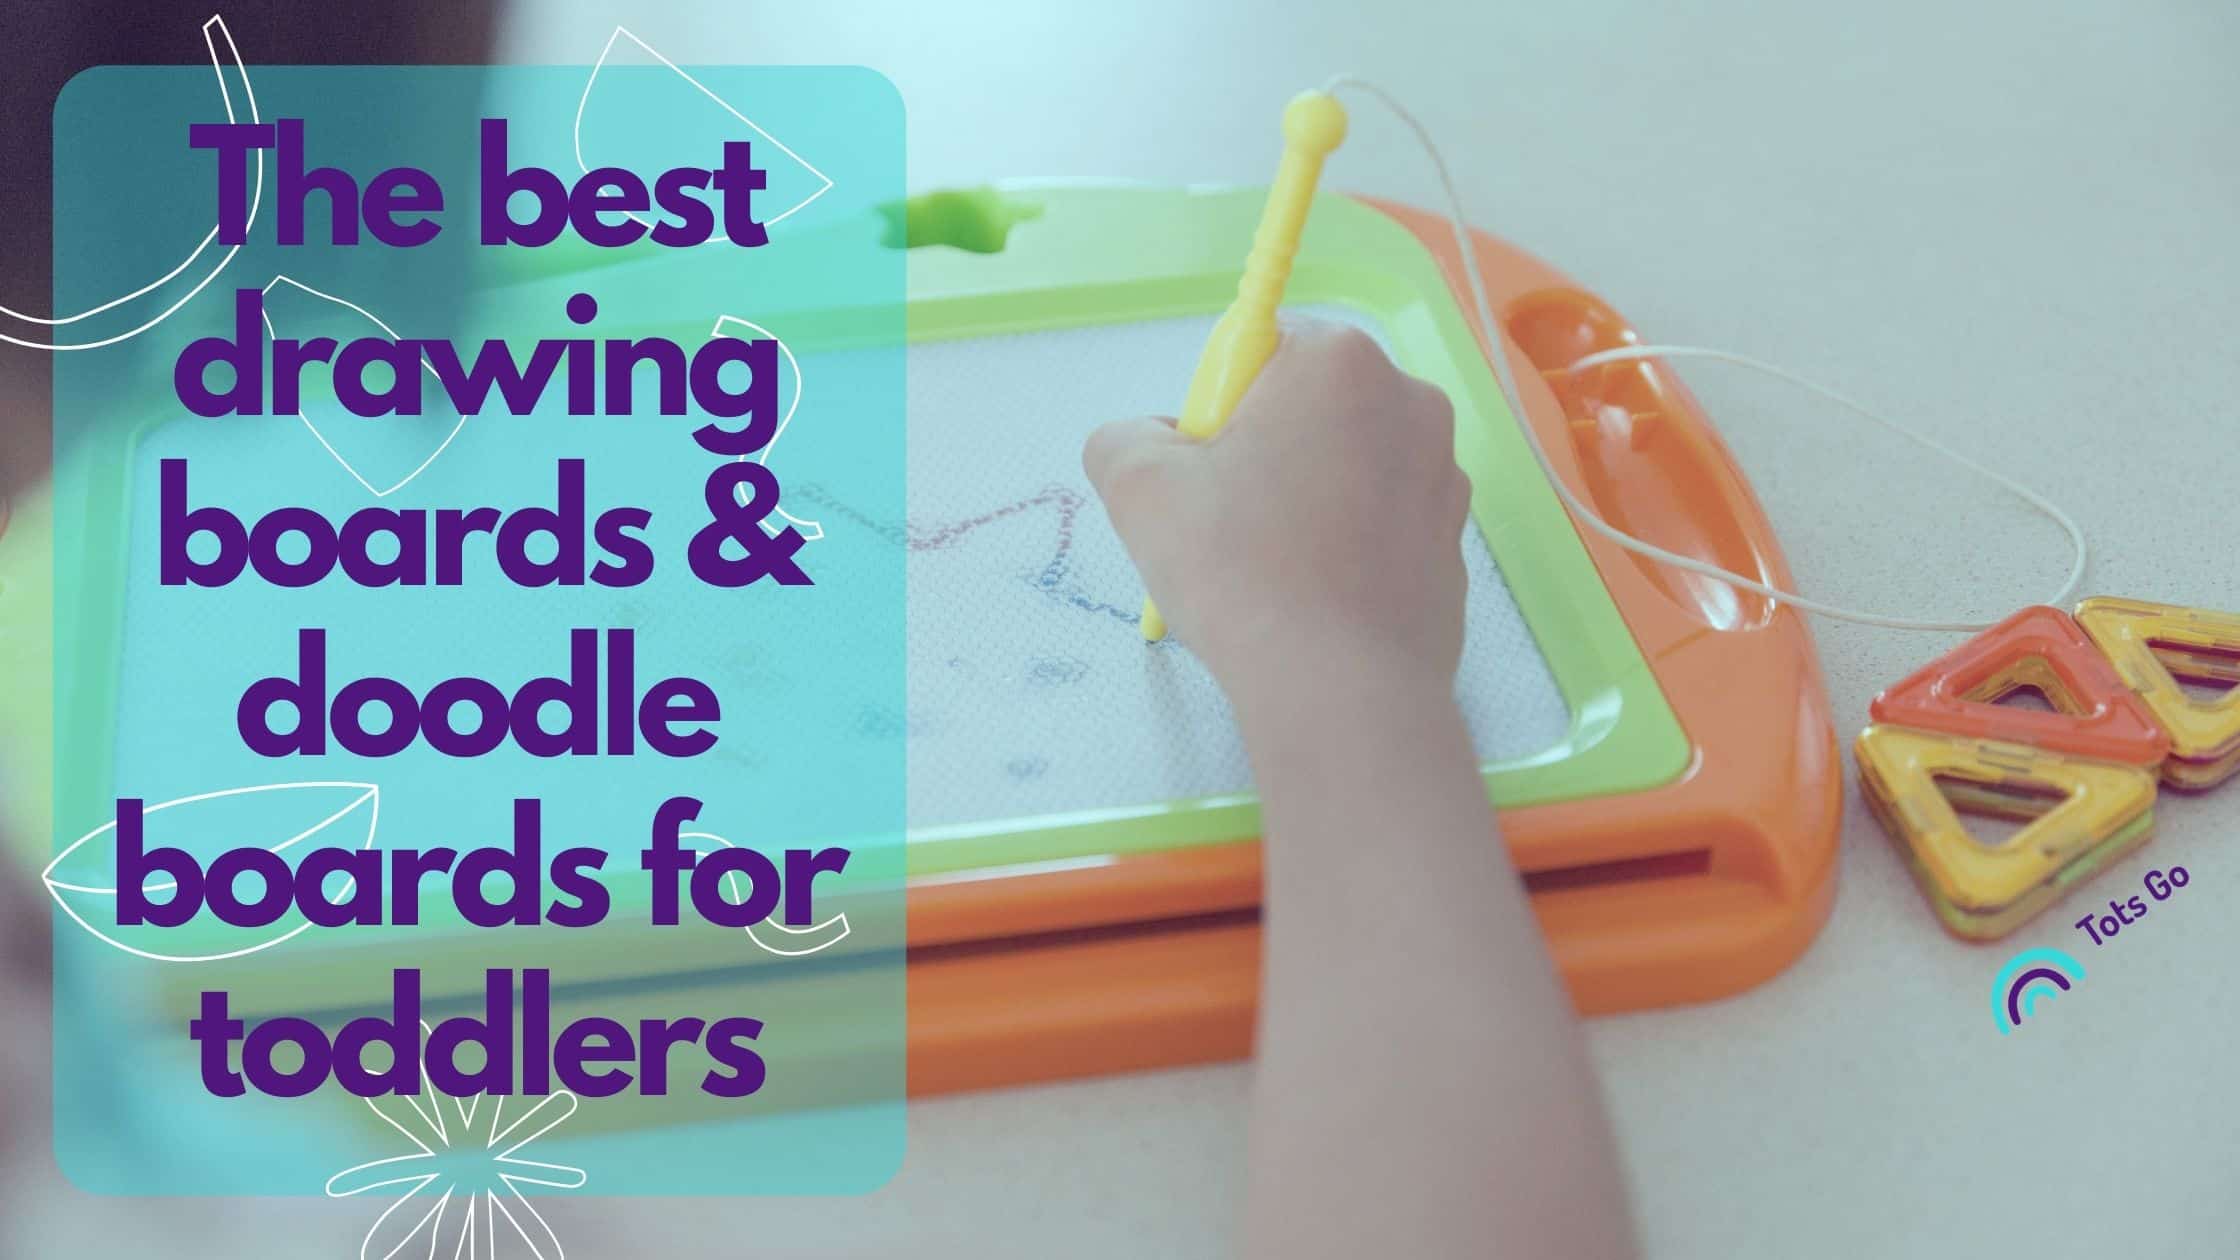 The best drawing boards and doodle boards for toddlers